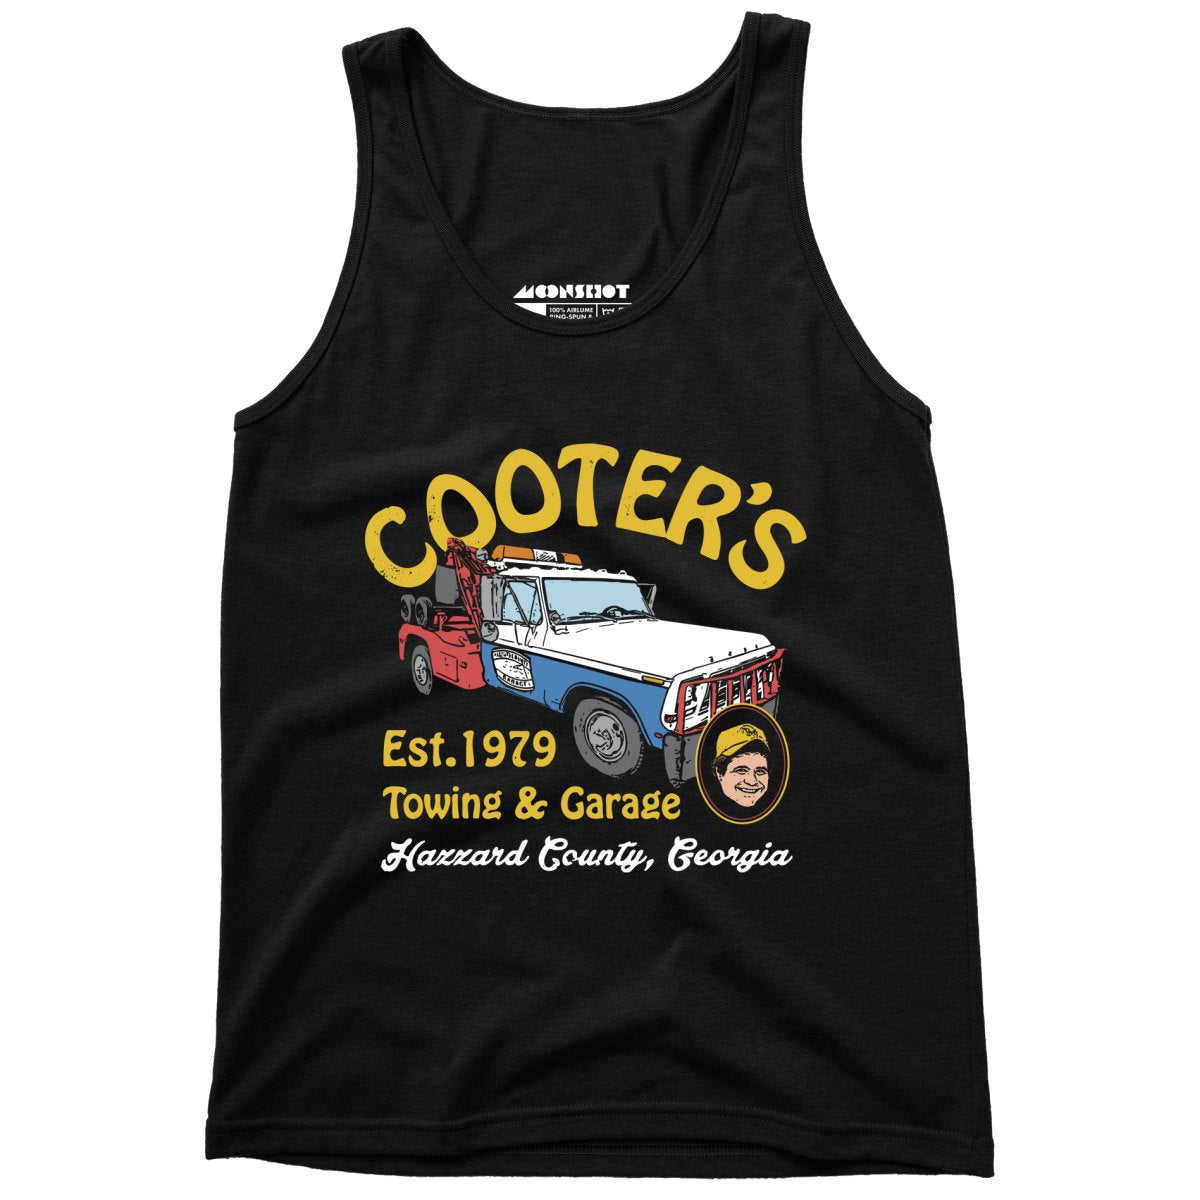 Cooter's Towing & Garage - Unisex Tank Top